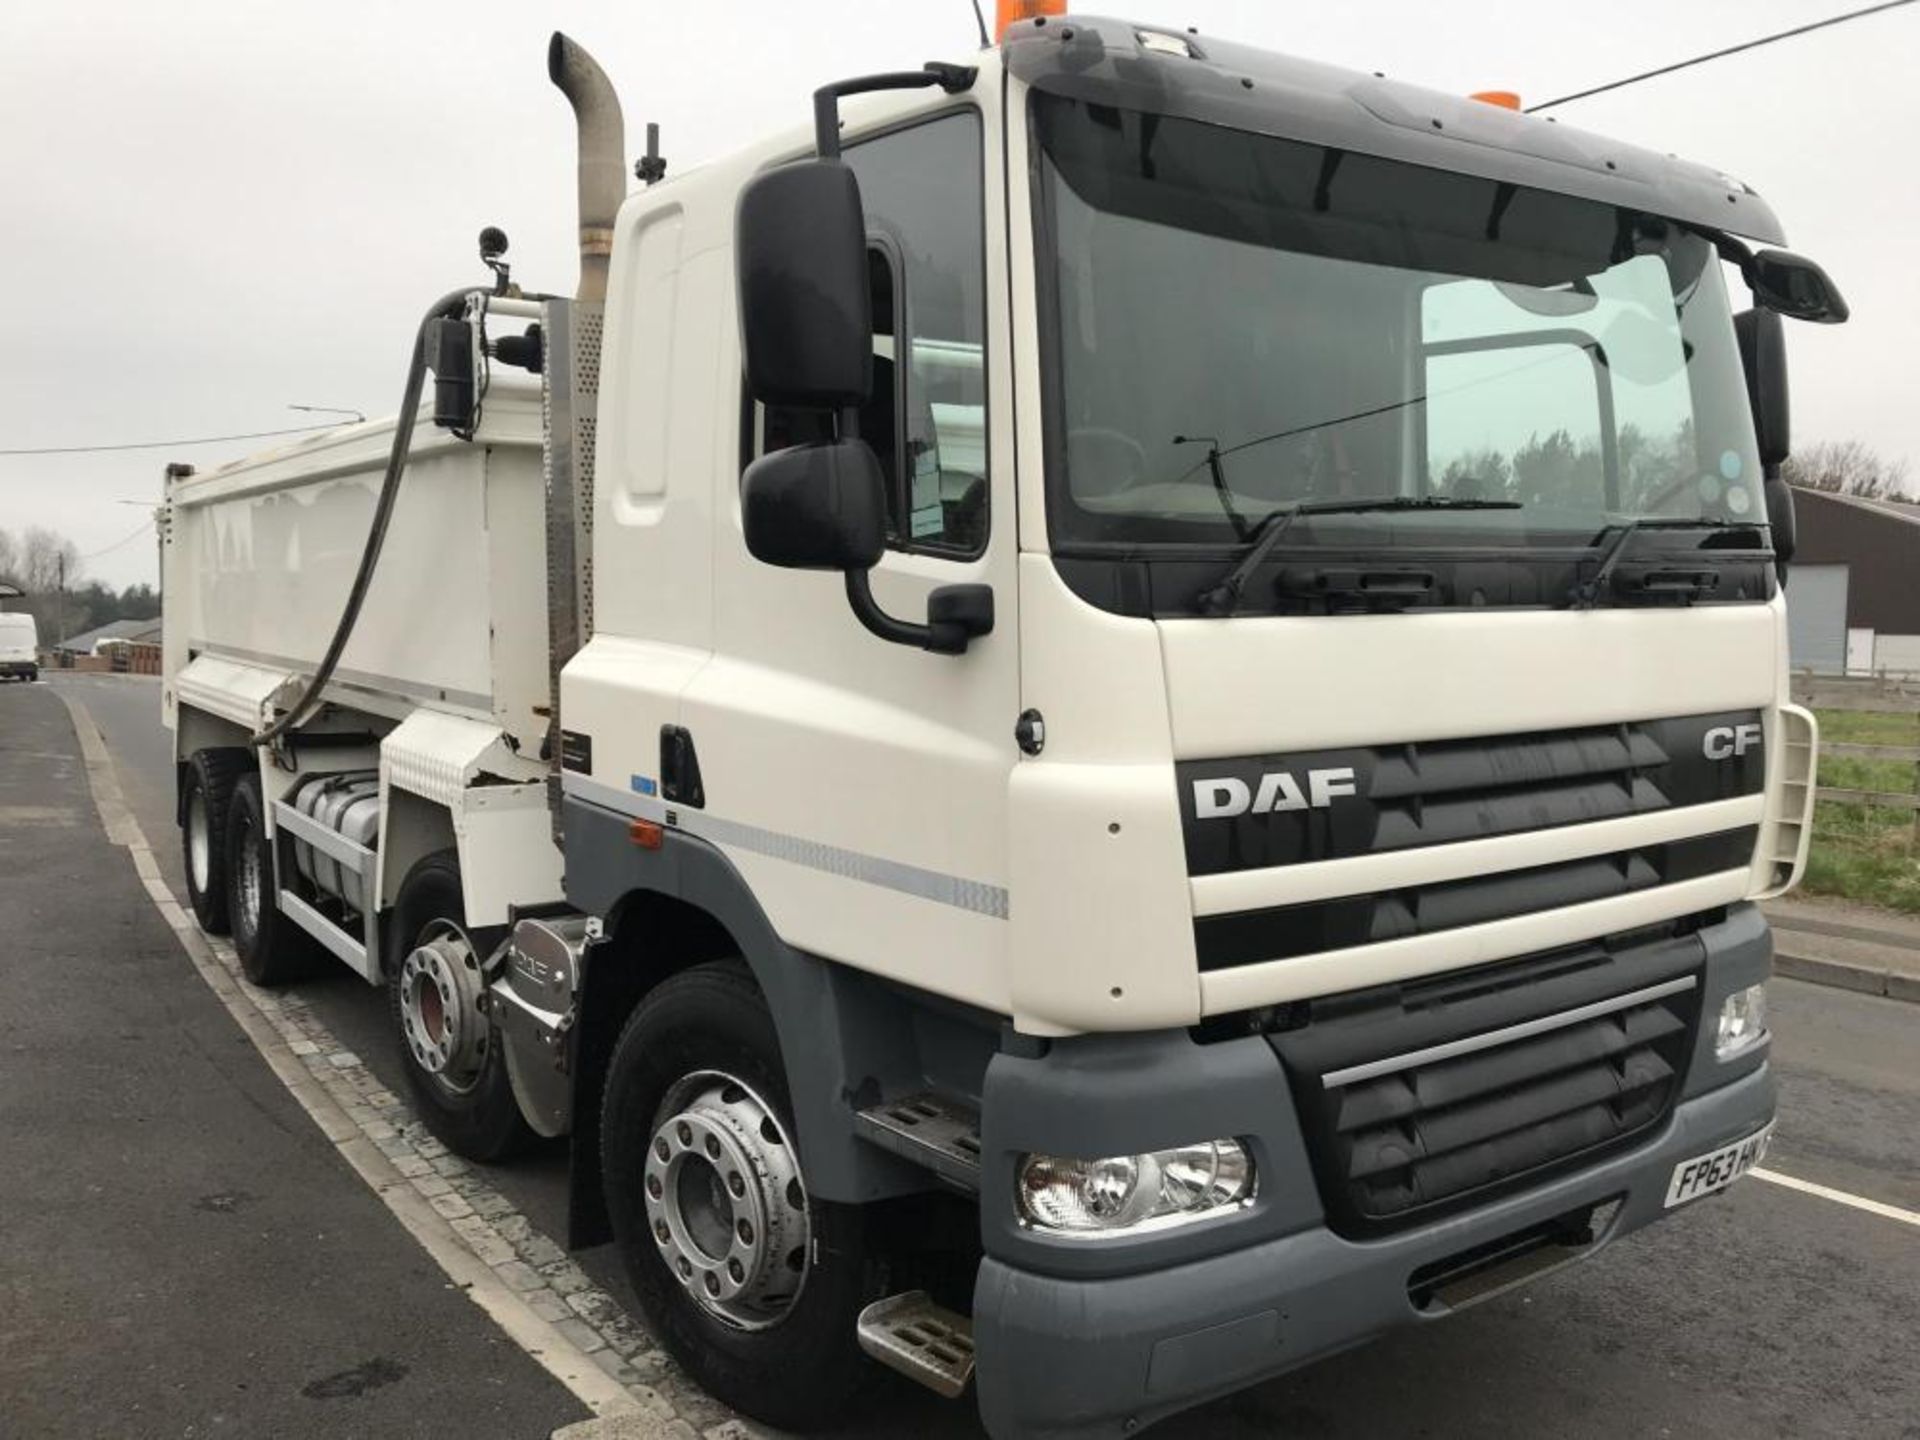 2013/63 REG DAF CF 85.410 8X4 STEEL BODY TIPPER WITH EASY SHEET, AUTO TAIL GATE & WEIGHER SYSTEM